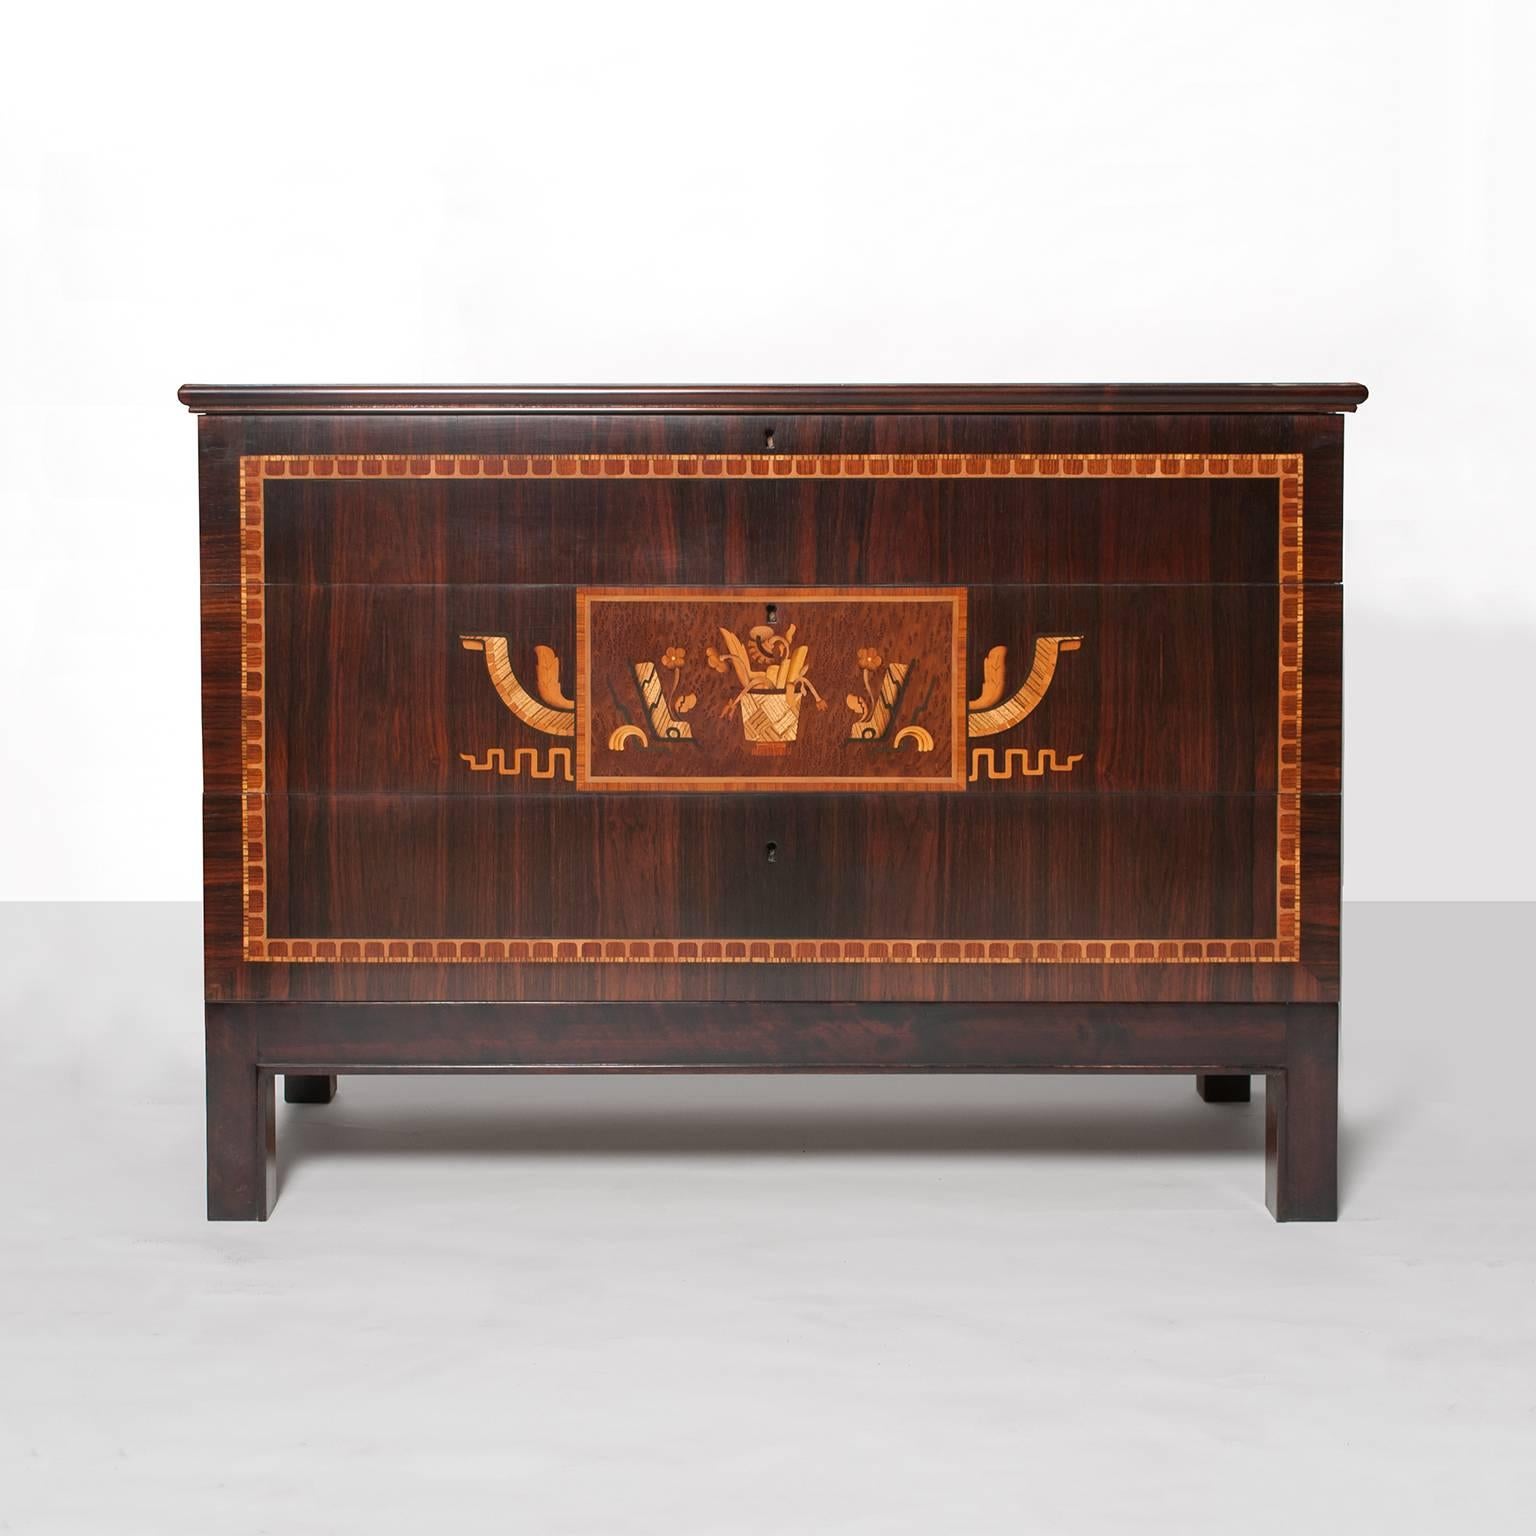 Swedish Art Deco chest with 3 drawers. Veneered in rosewood and finely detailed with bands of marquetry on the front, sides and top. The center drawer has a beautiful marquetry cartouche depicting stylized flowers in a basket with flanking abstract